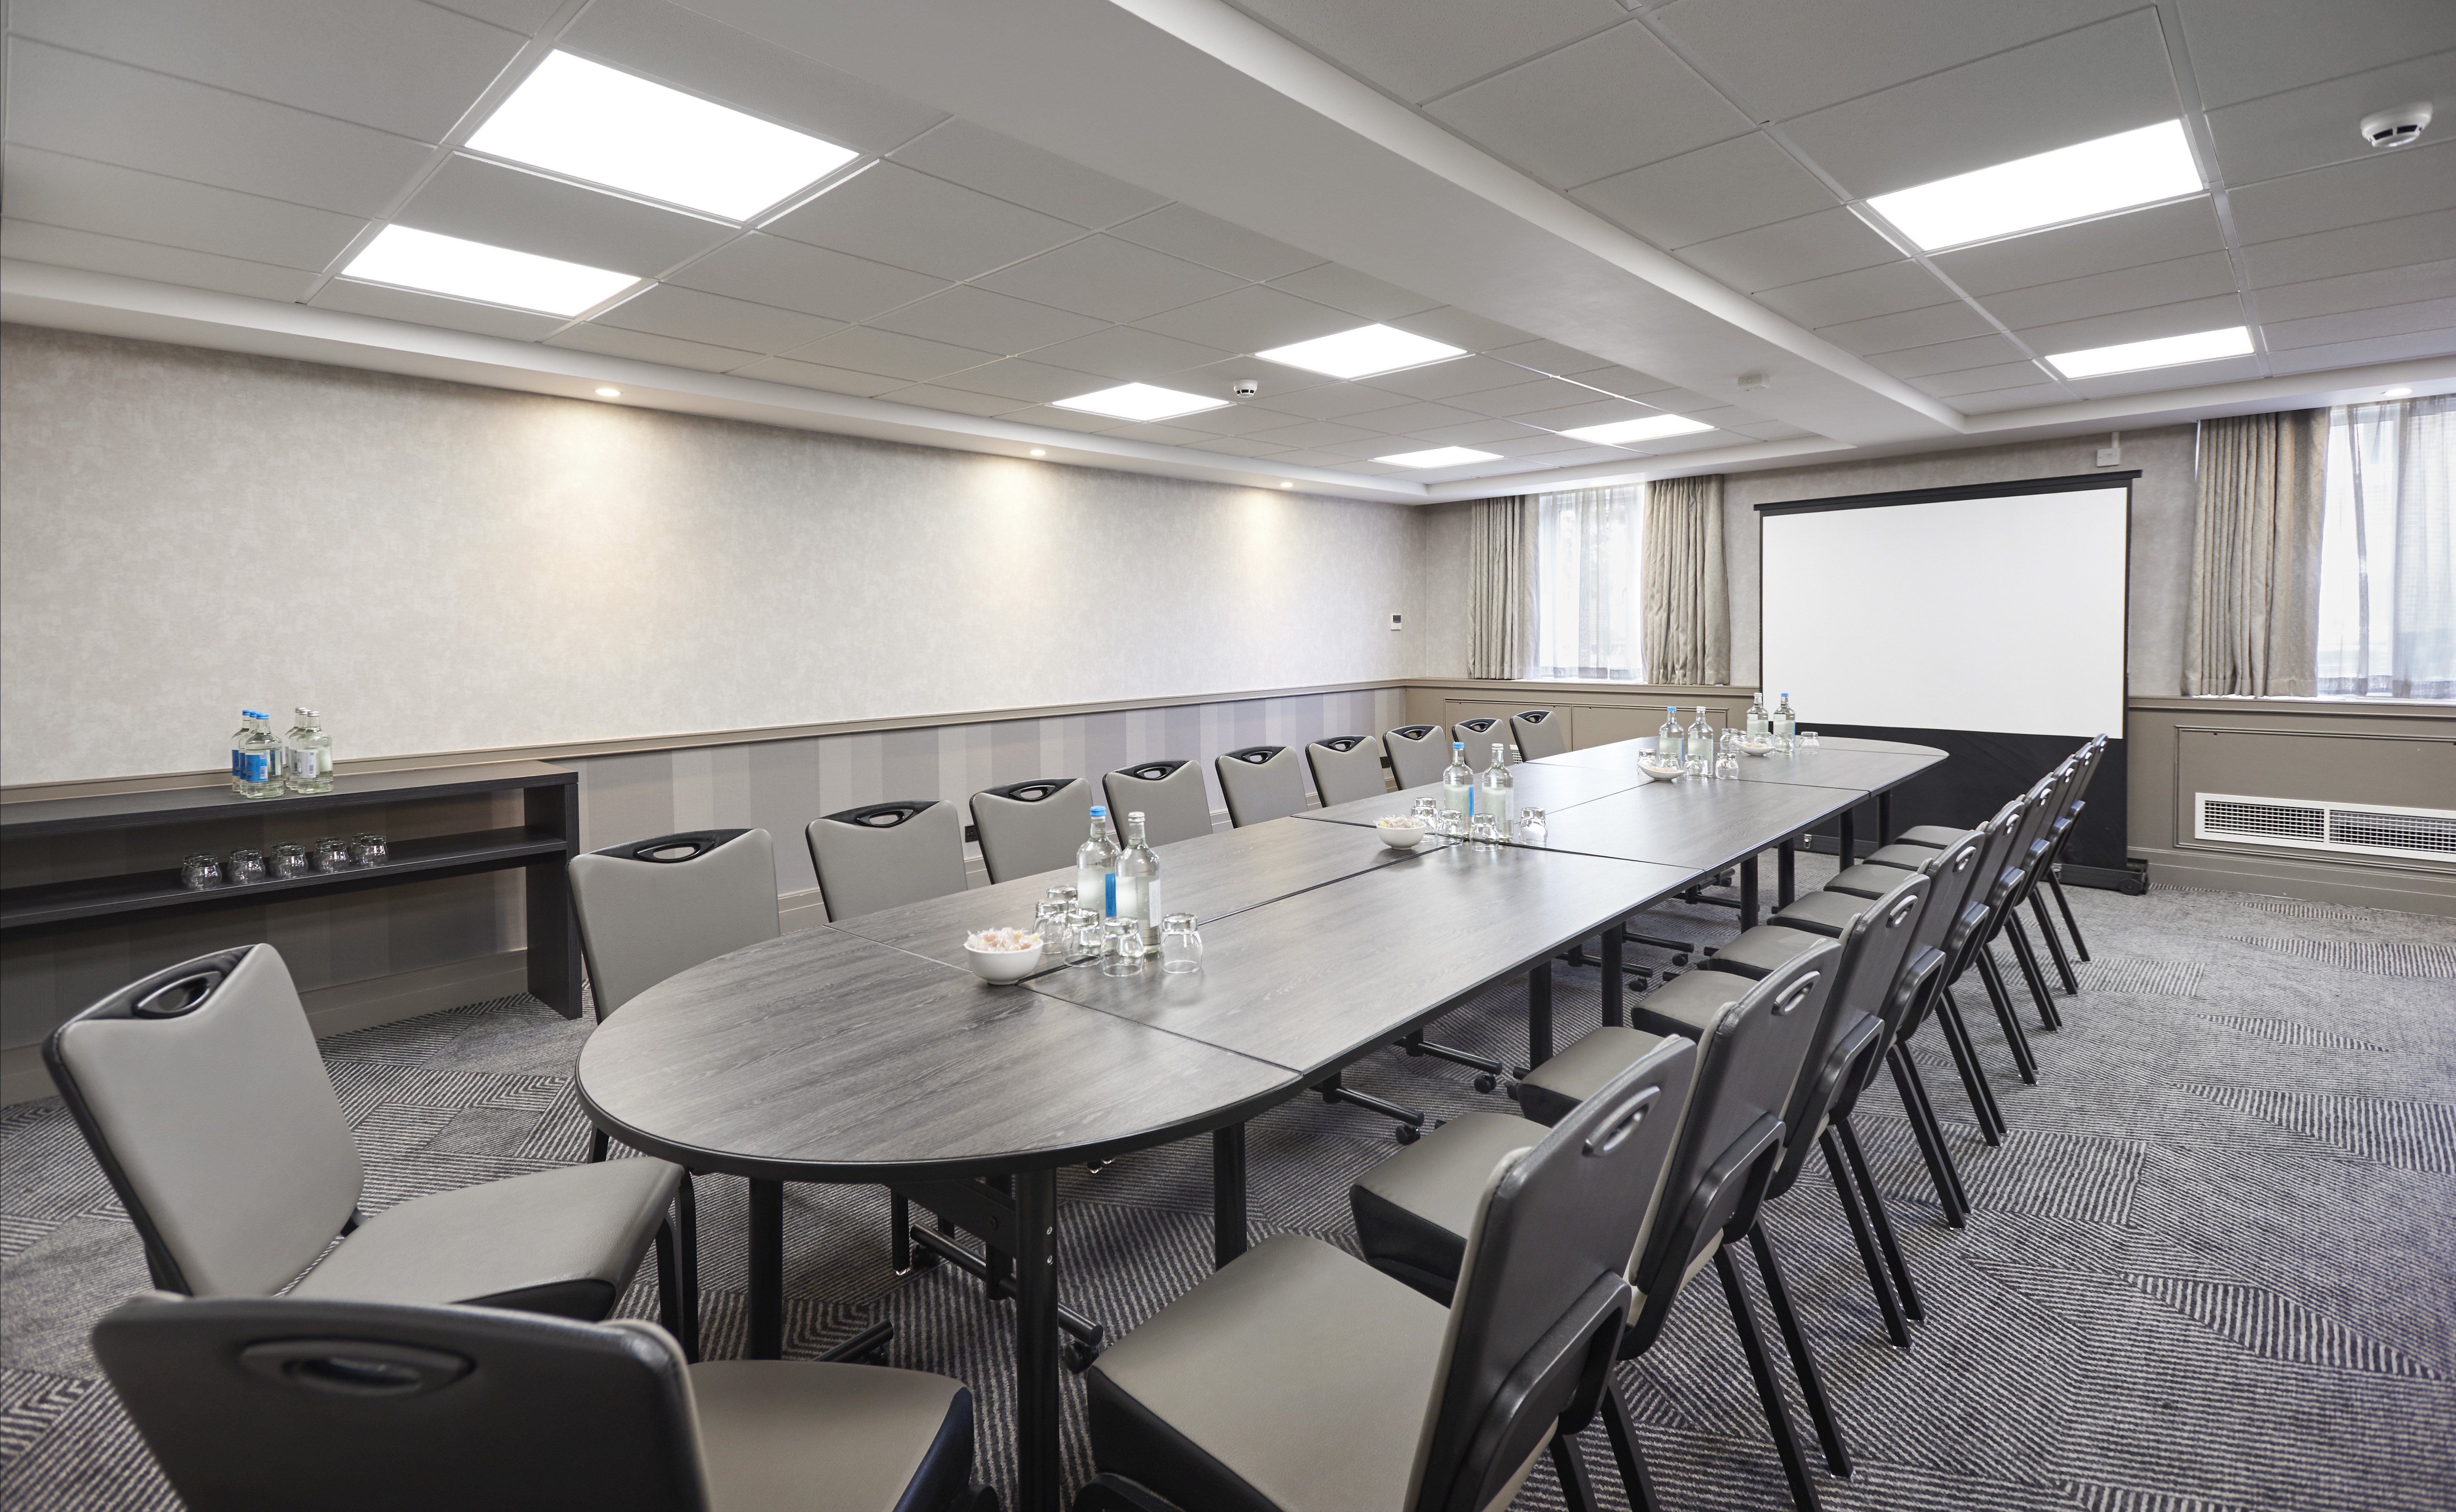 Angled View of Beverage Station, Windows With Sheer Drapes, Presentation Screen, and Seating For 20 At Boardroom Table With Water Bottles and Drinking Glasses in Enbourne Meeting Room